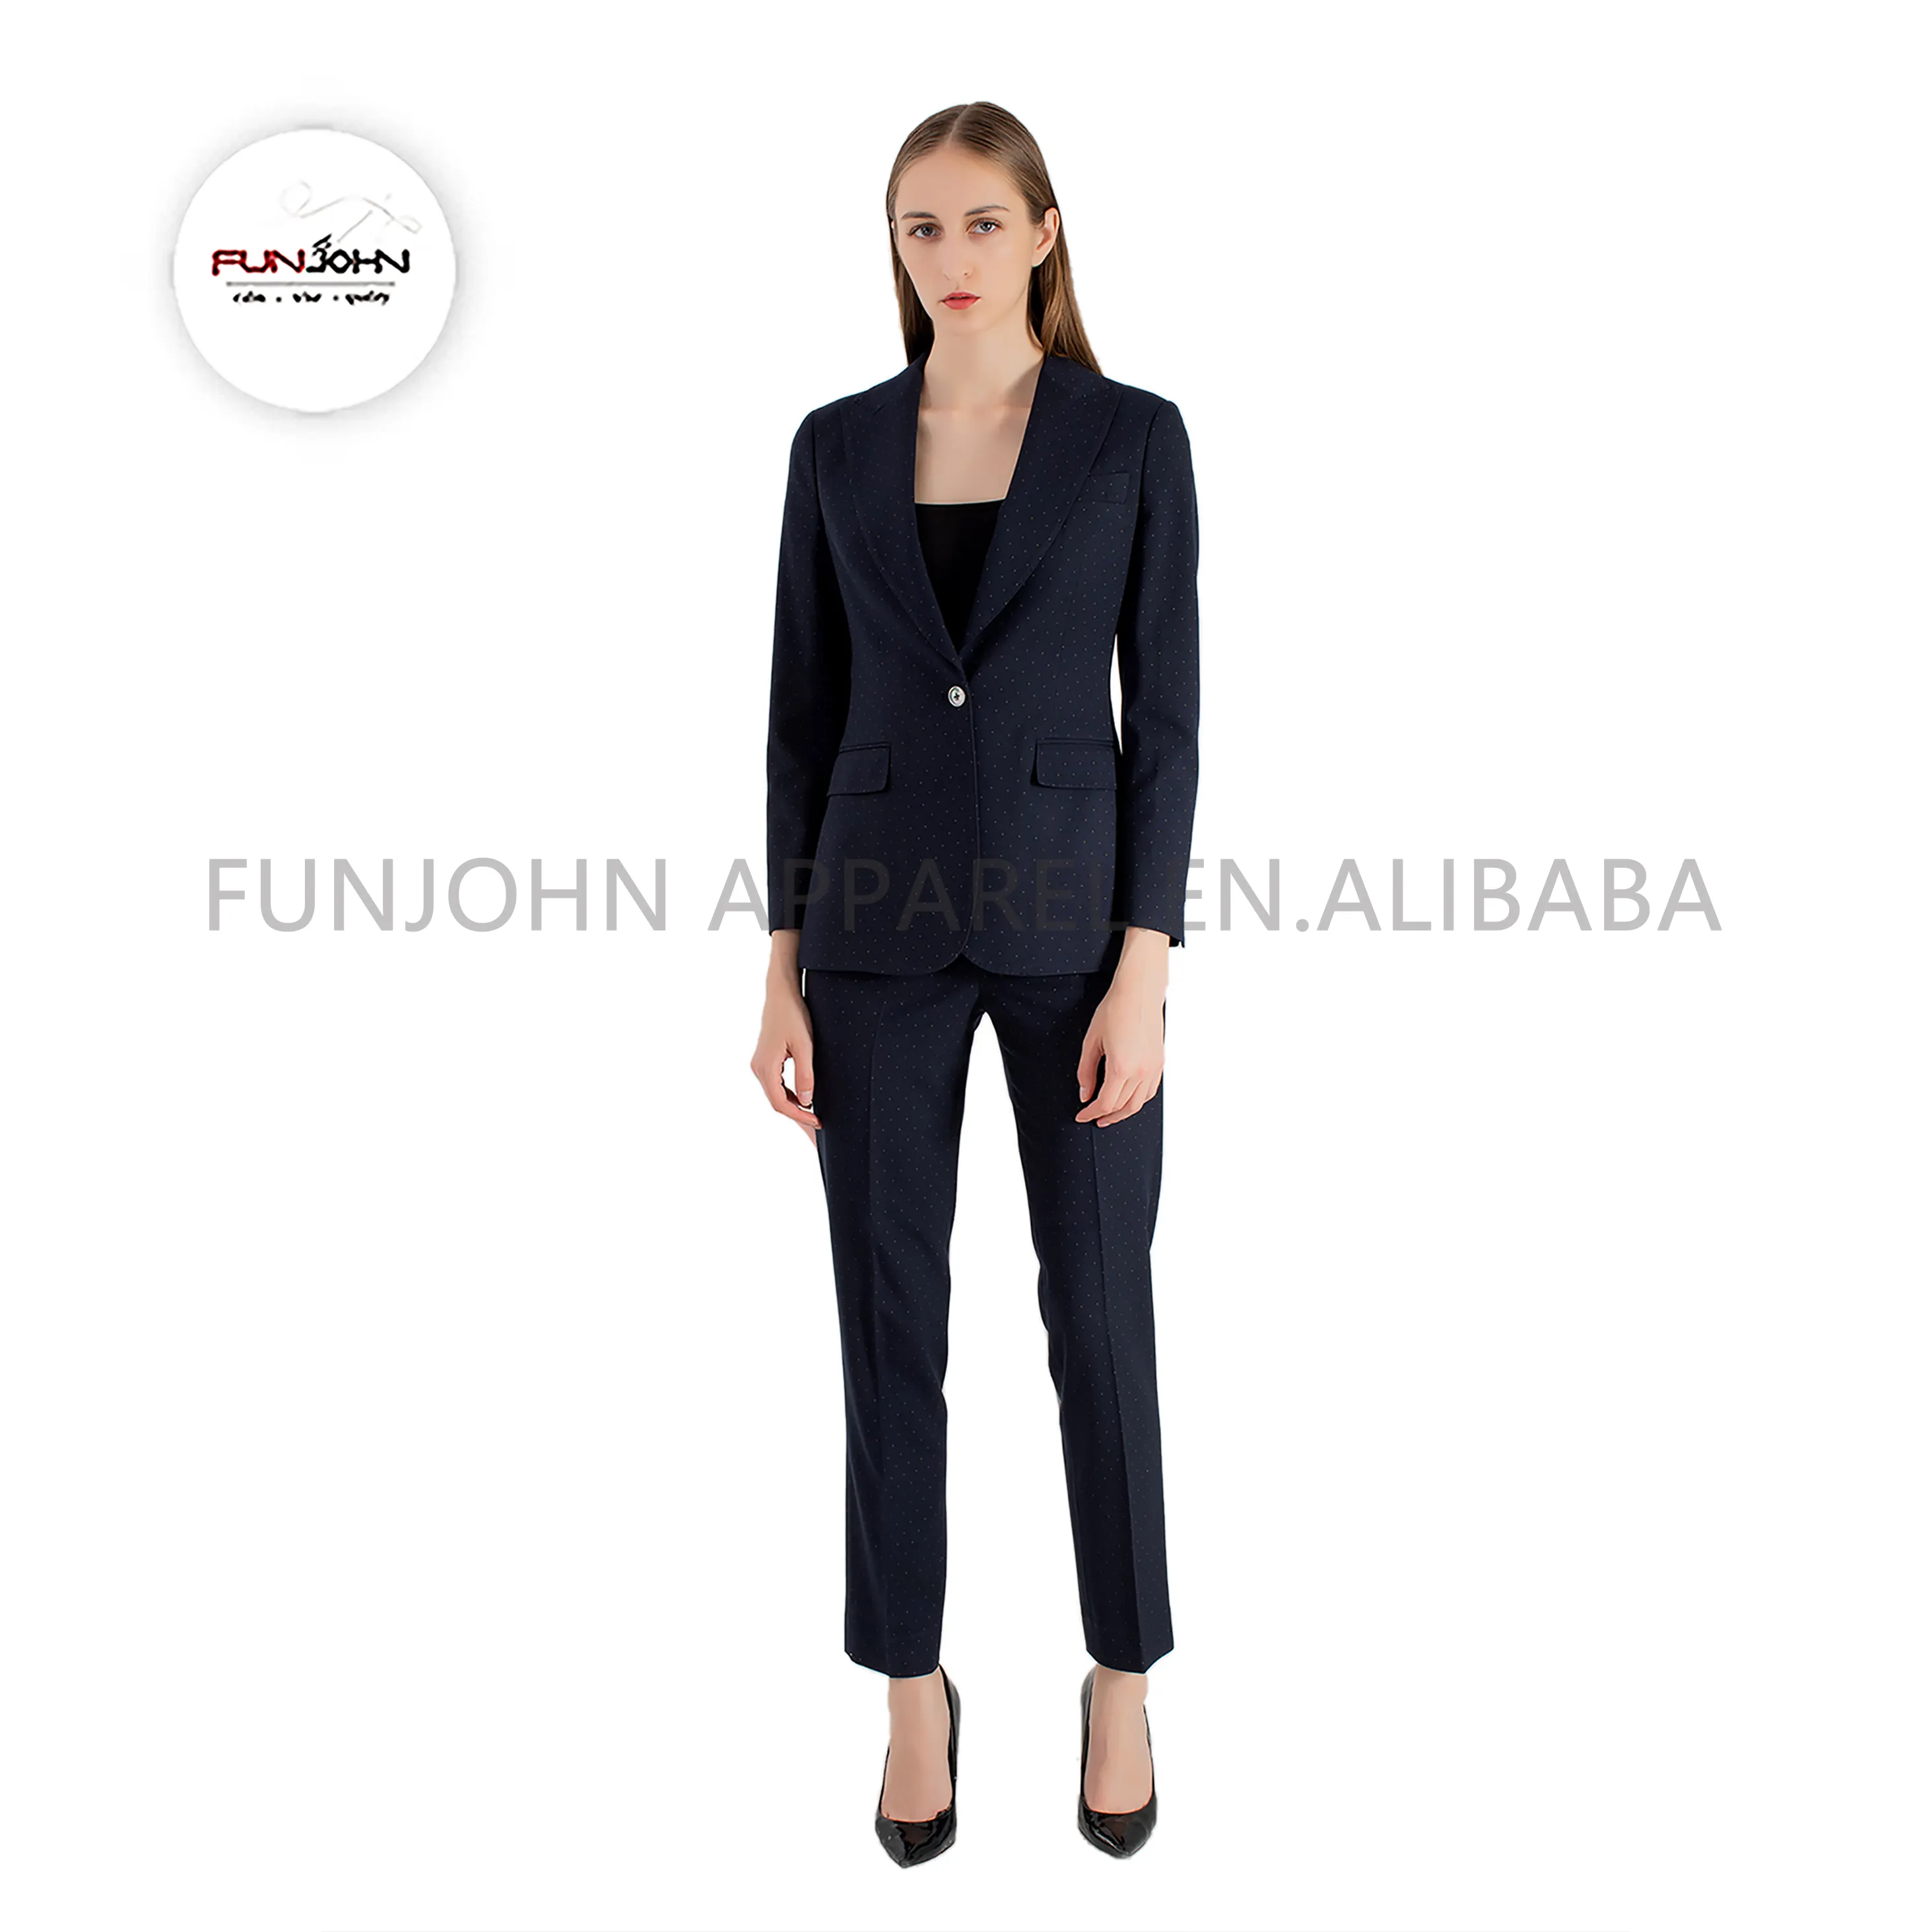 dotted printing best formal business attire office uniform designs for women new style